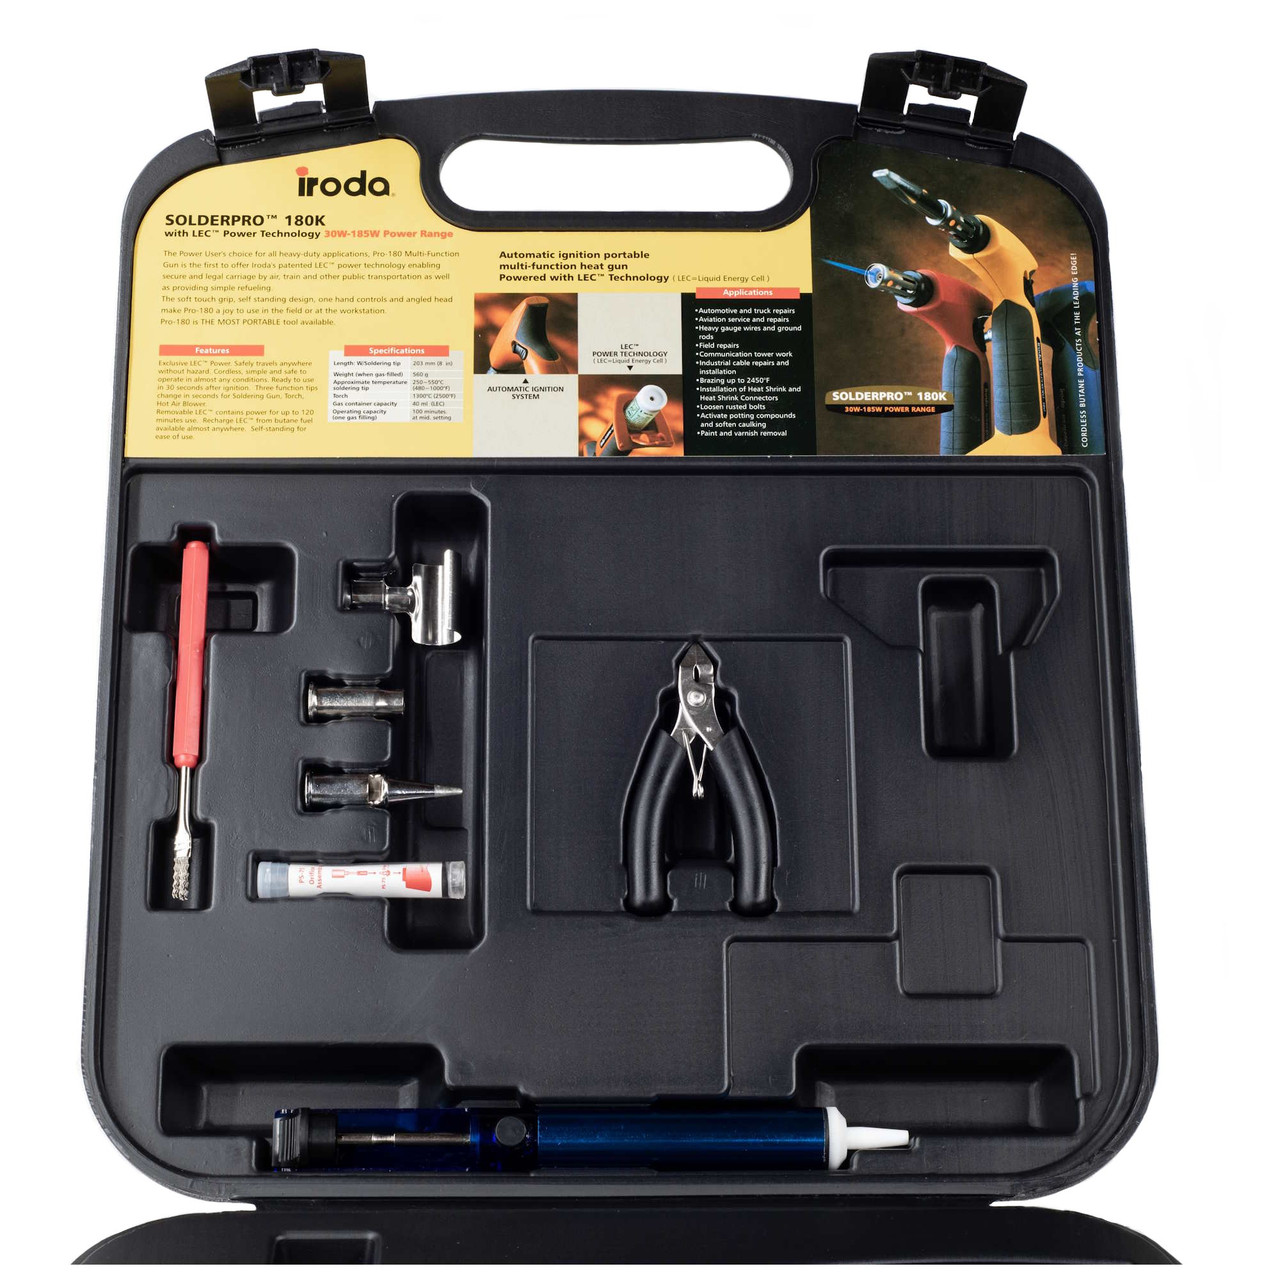 Top Section of Kit - also includes a replacement orifice, precision cutters, wire brush and solder dispenser